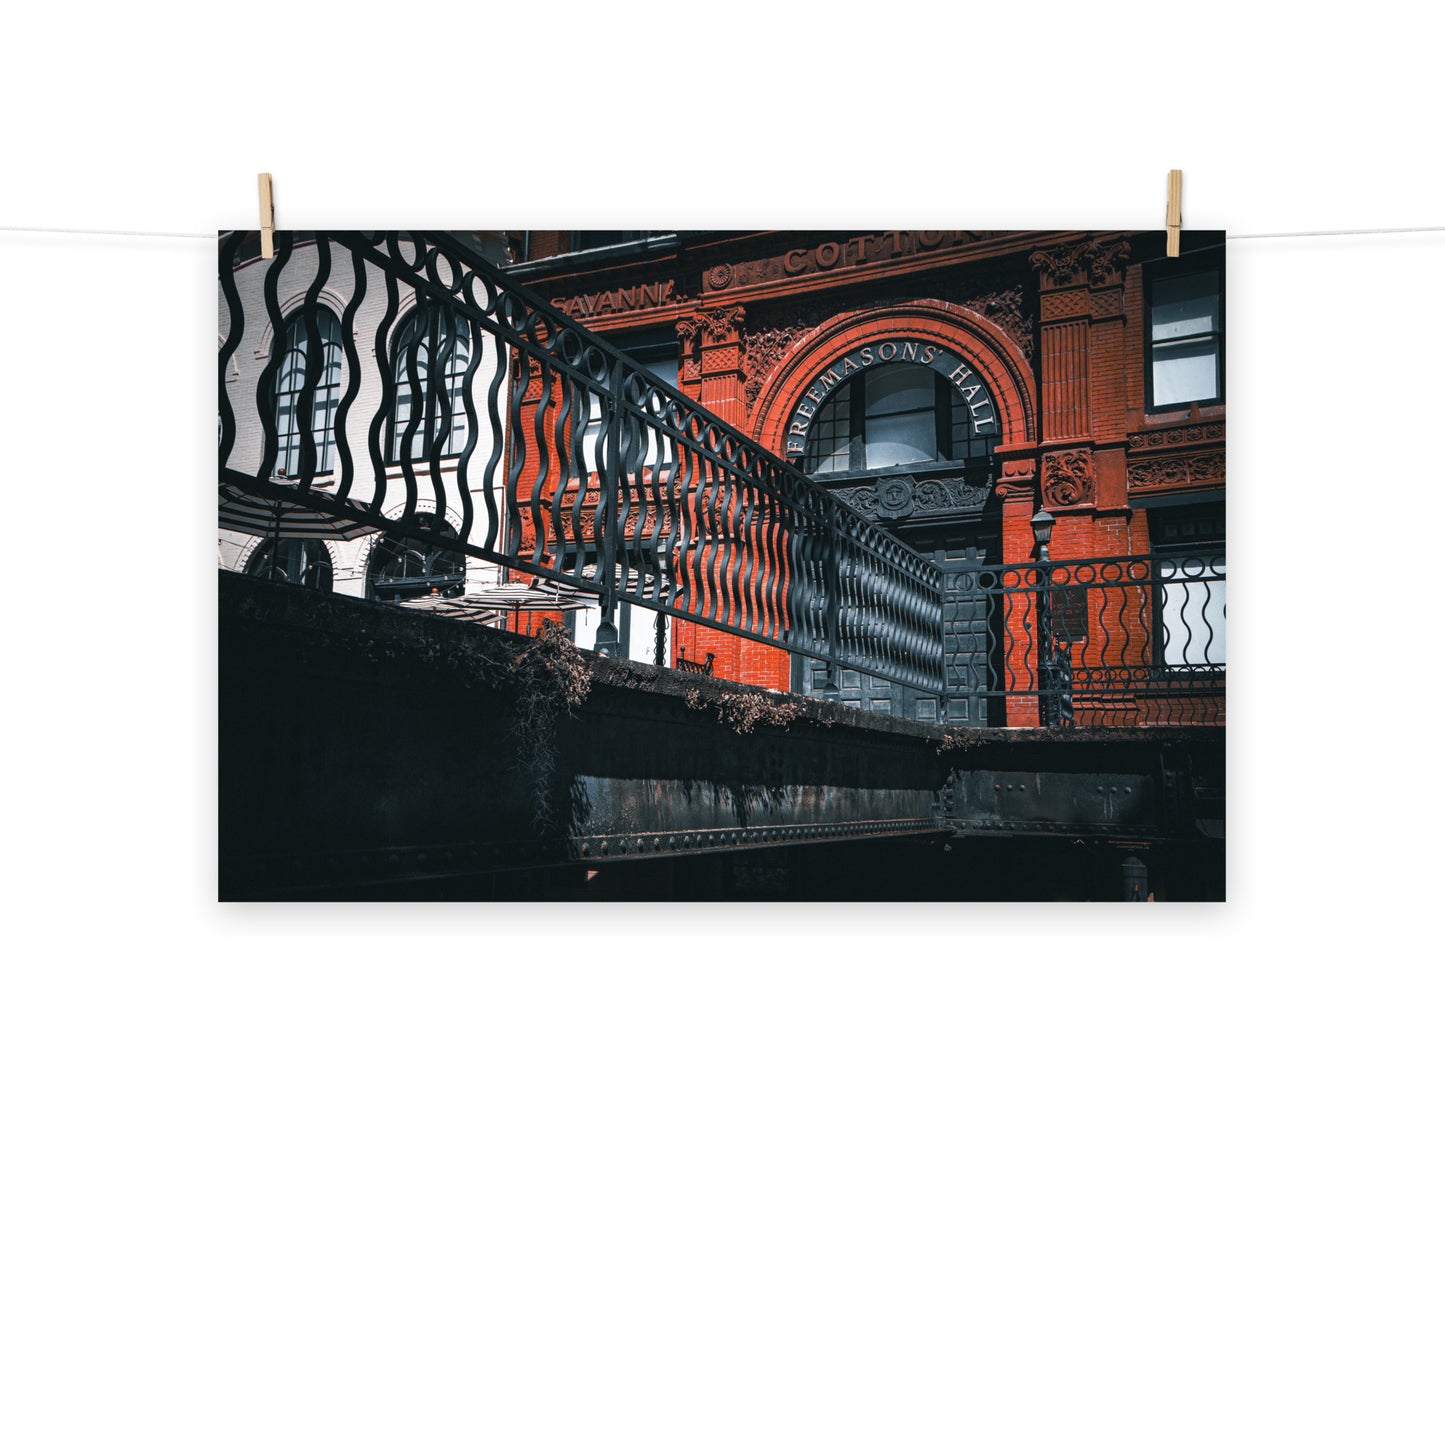 Architectural / Industrial / Cityscape Abstract Decor Savannah Cotton Exchange Freemasons' Hall Loose Wall Art Print 8" x 10"